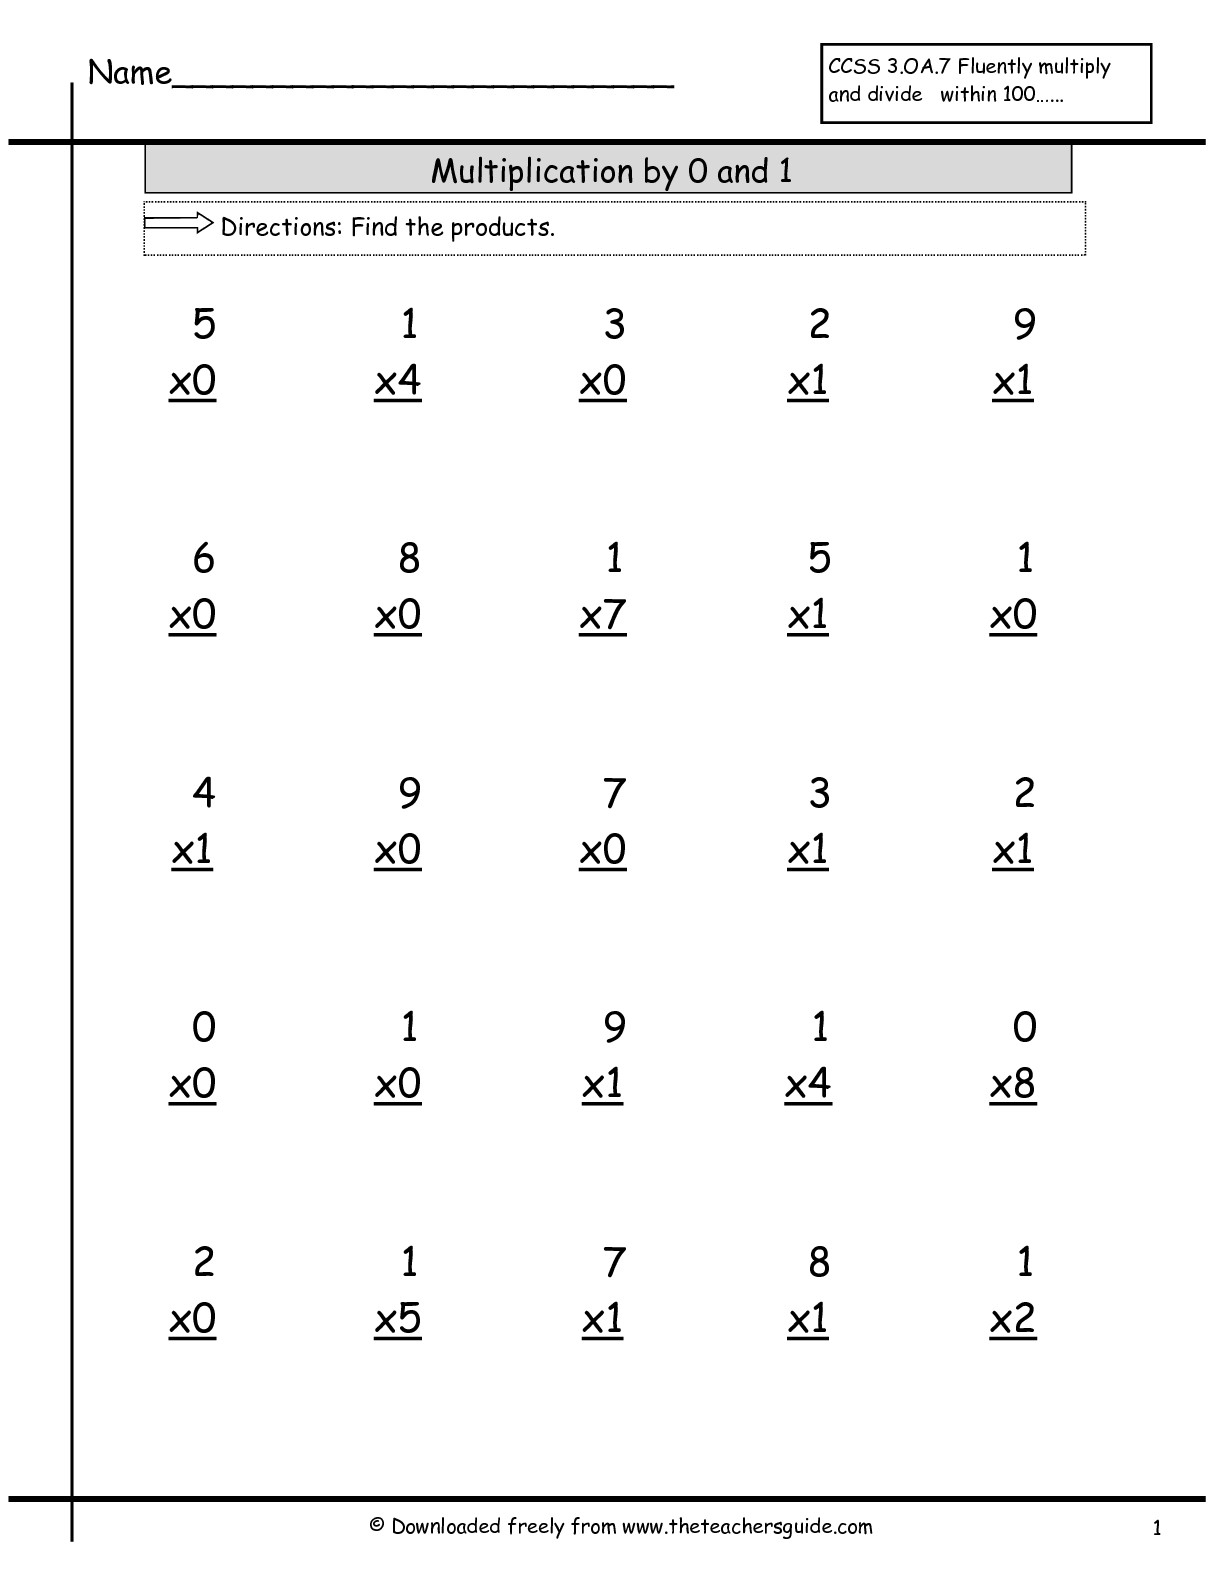 Multiplication Facts Worksheets From The Teacher&amp;#039;s Guide pertaining to Multiplication Worksheets Of 2